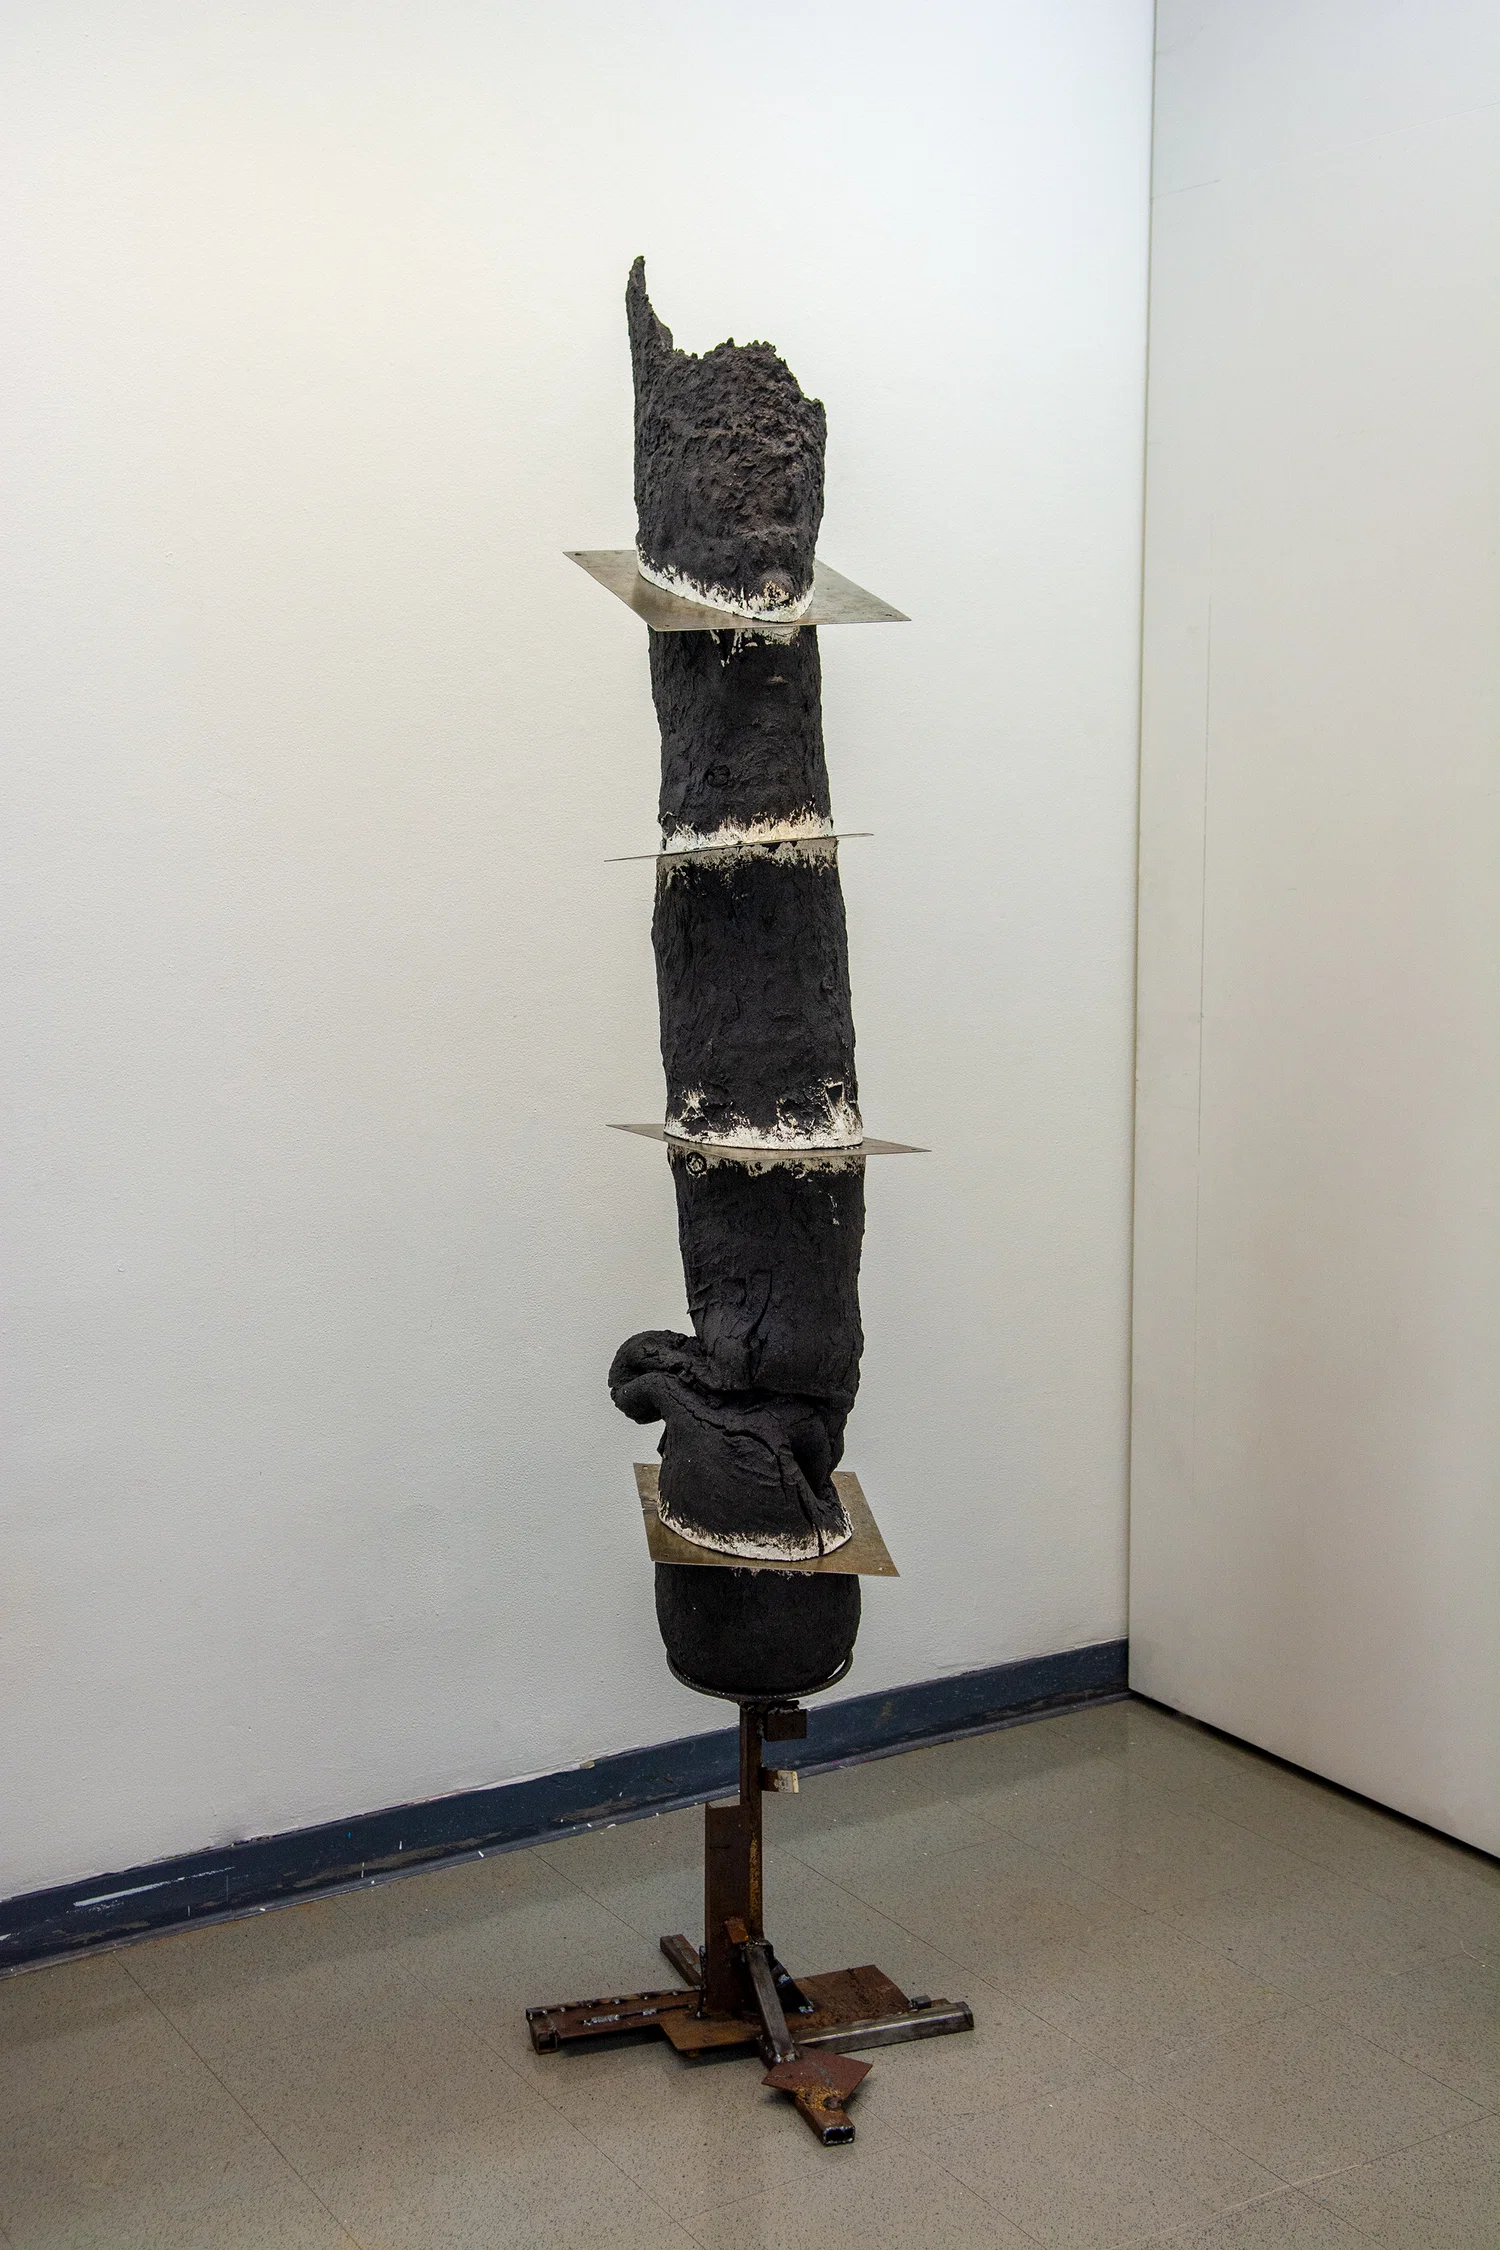 7 foot tall black ceramic pillar. Cut horizontally into 5 pieces by steel plates, none of the plates are level. It's held up by a short rusted steel structure.